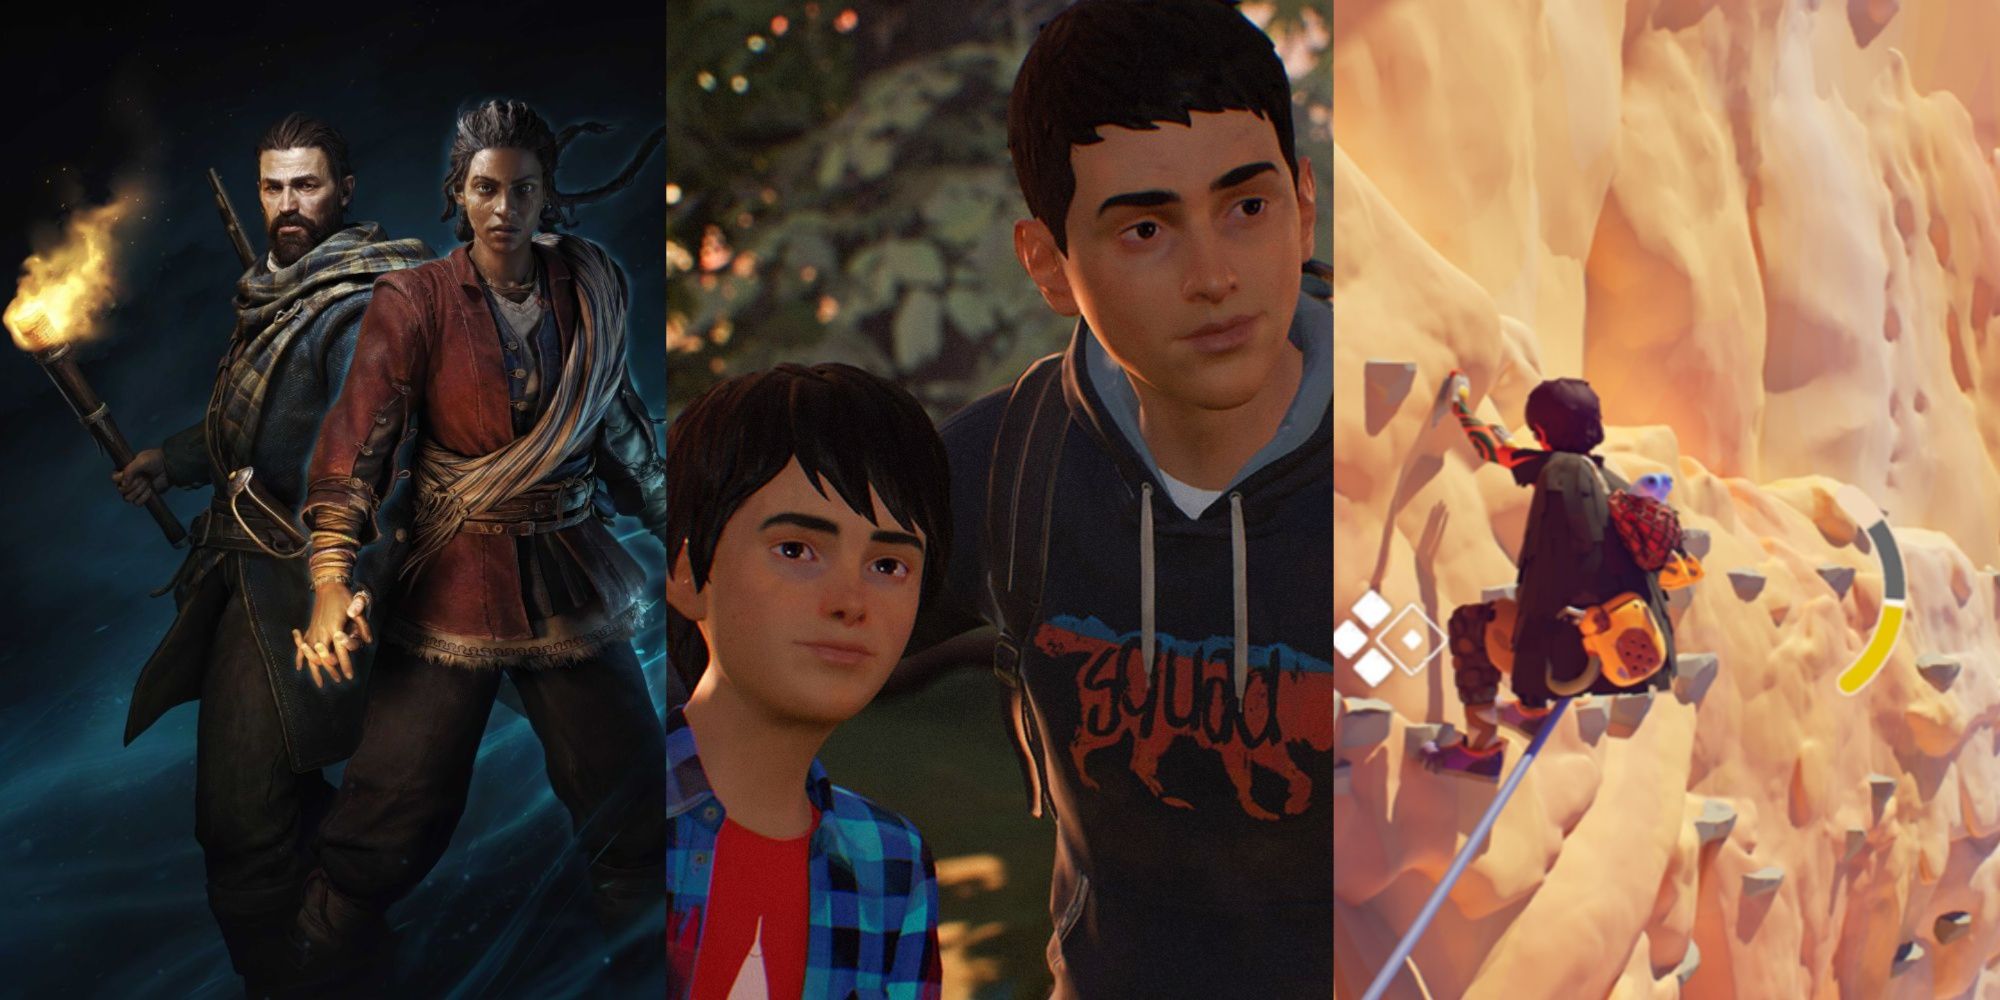 Three-image collage of Red and Antea on the cover art for Banishers: Ghosts of New Eden, brothers Sean and Daniel Diaz in Life is Strange 2, and Jusant's protagonist scaling a rocky cliff with a companion.